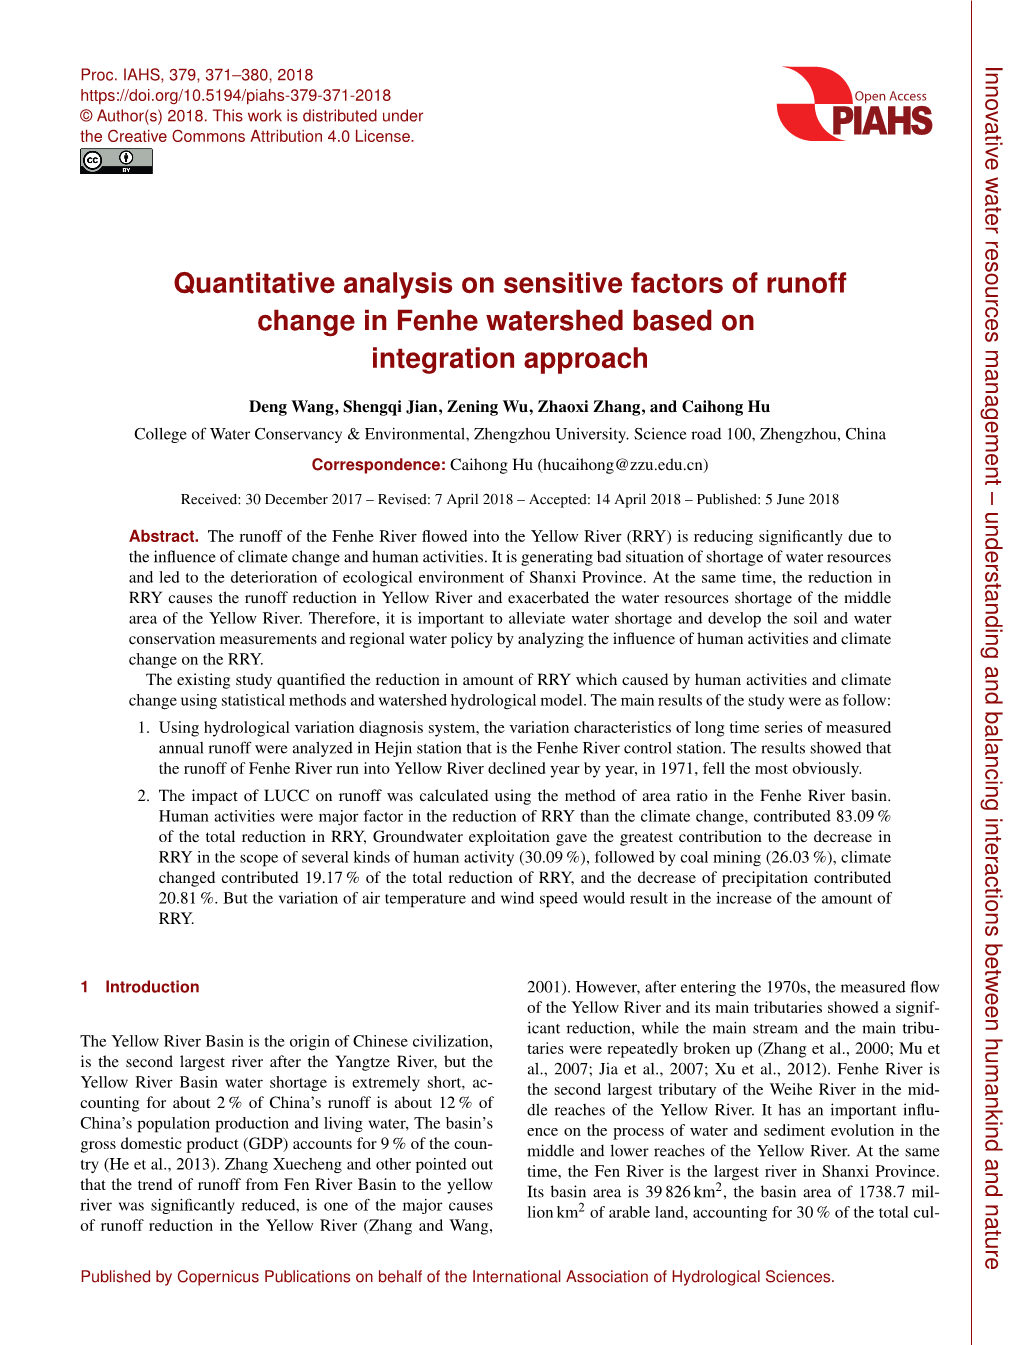 Quantitative Analysis on Sensitive Factors of Runoff Change in Fenhe Watershed Based on Integration Approach